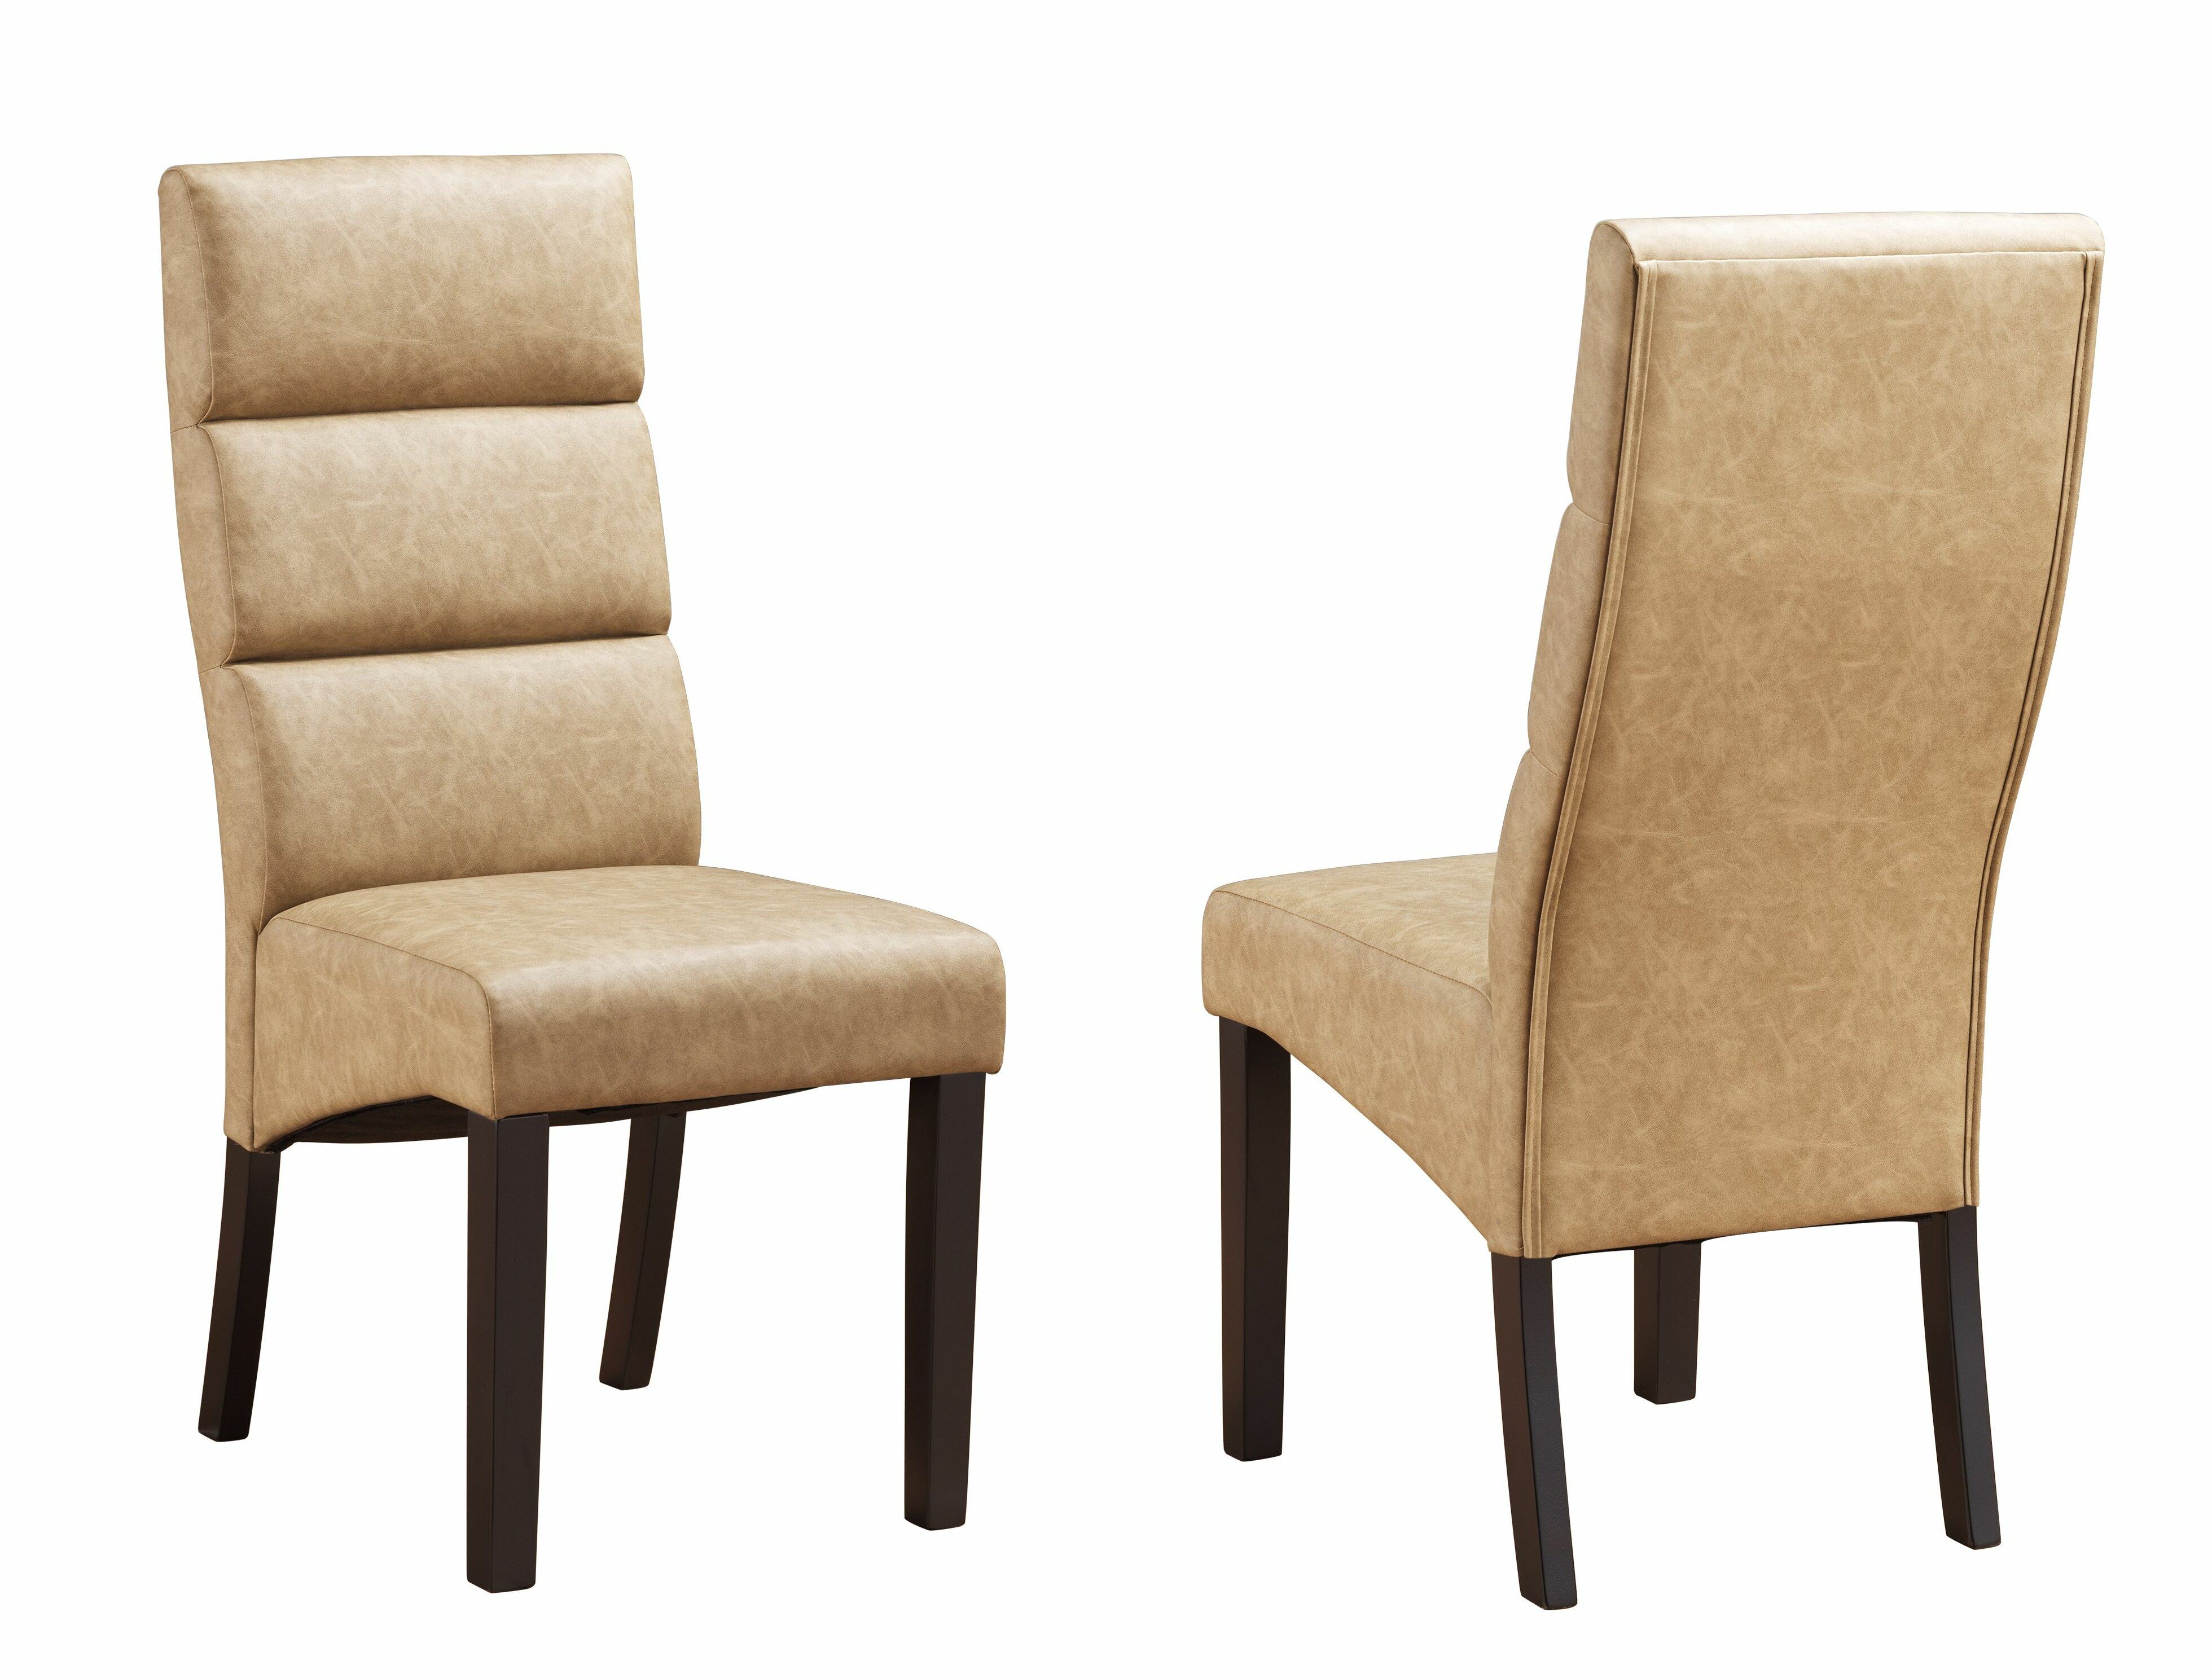 Teixeira Upholstered Dining Chair In Recent Reinert 5 Piece Dining Sets (View 18 of 20)